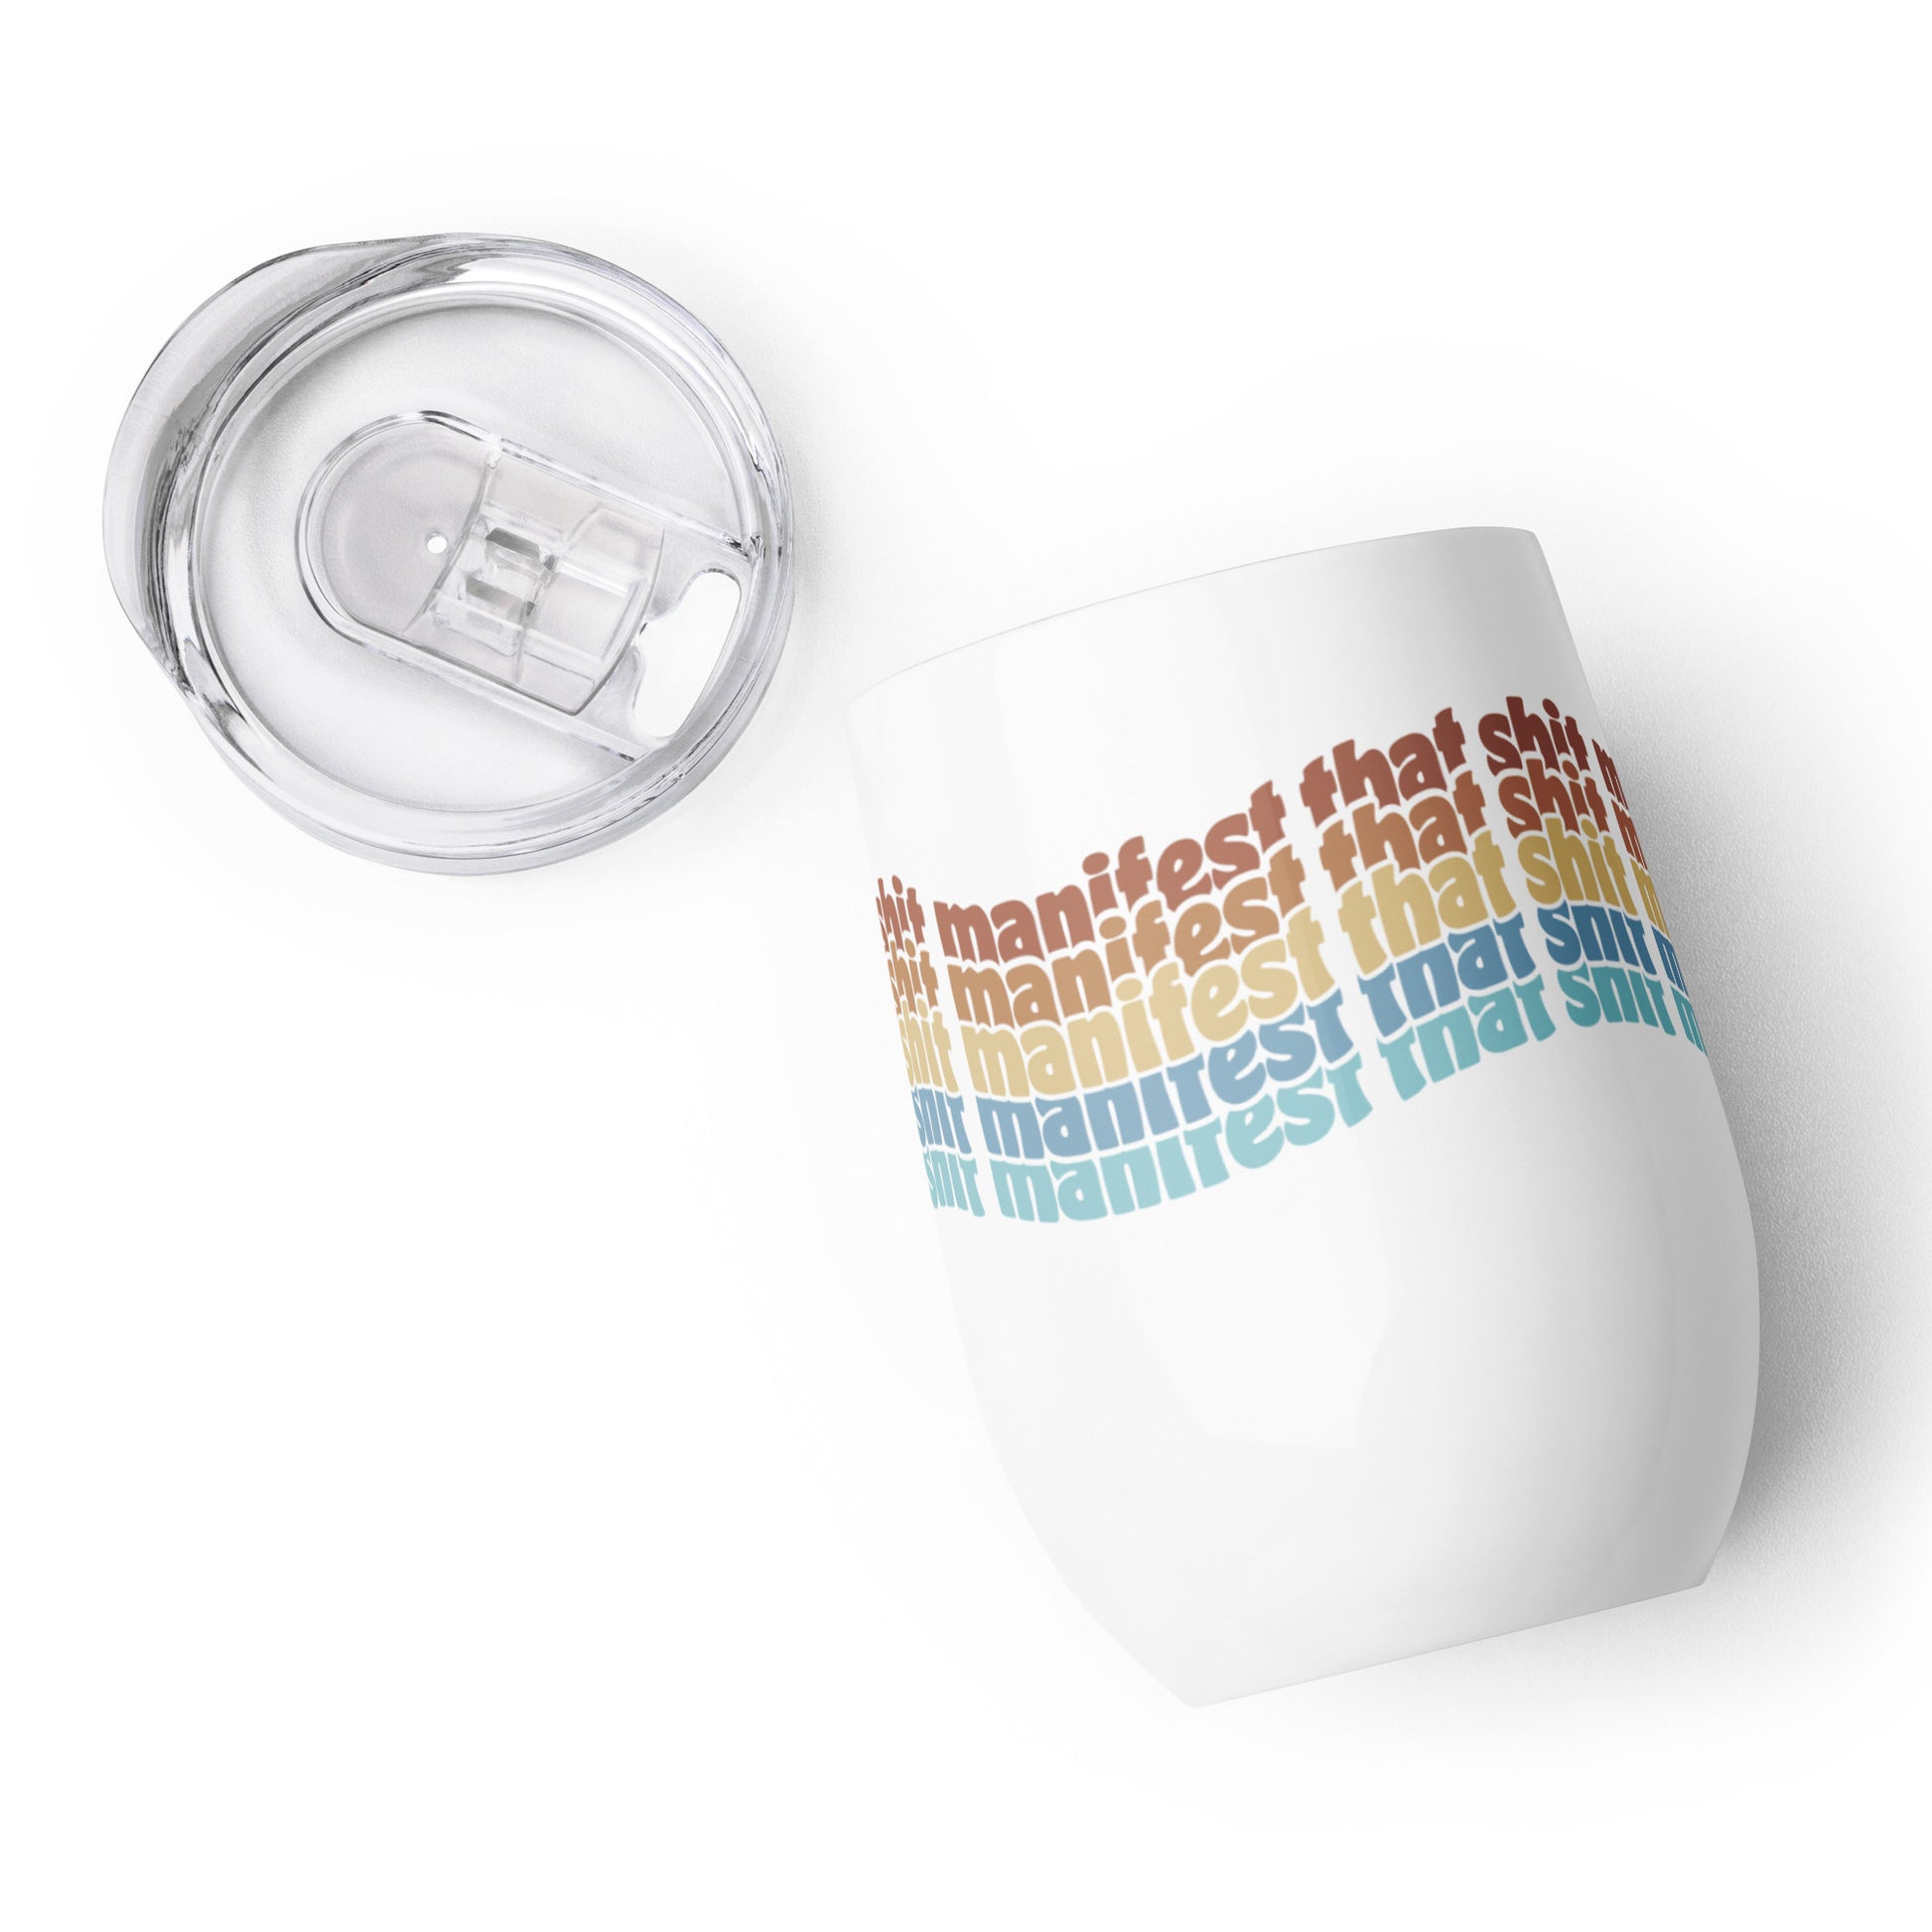 A close-up image of a wine tumbler, laying open on its side. The tumbler's plastic lid is laying next to the tumbler. Rainbow text wraps around the tumbler that reads "manifest that shit".